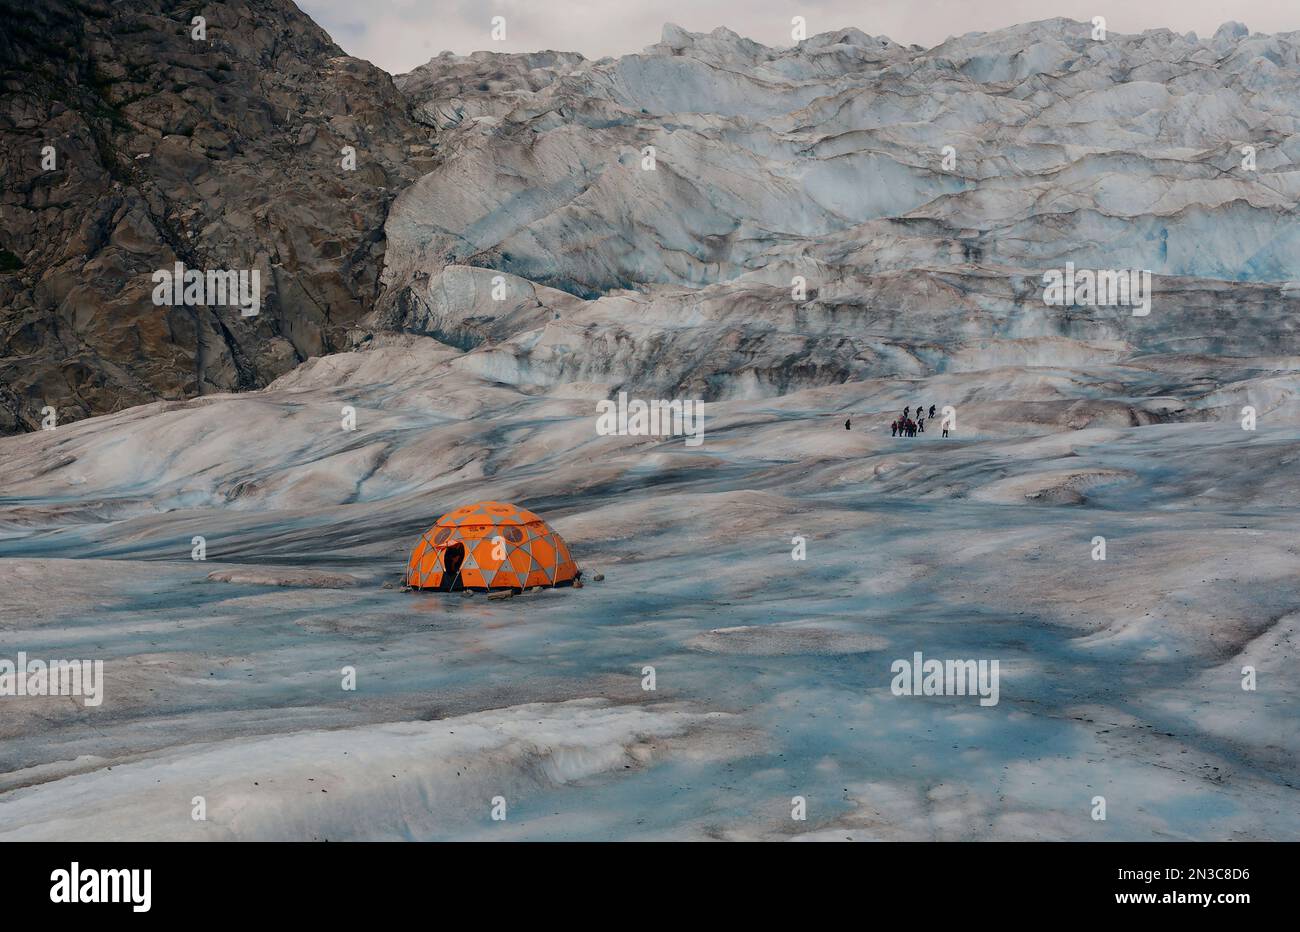 Climbers leave their base camp to trek on the ice field of Mendenhall Glacier. The glacier is one of many that connect to the vast Juneau Ice Field... Stock Photo